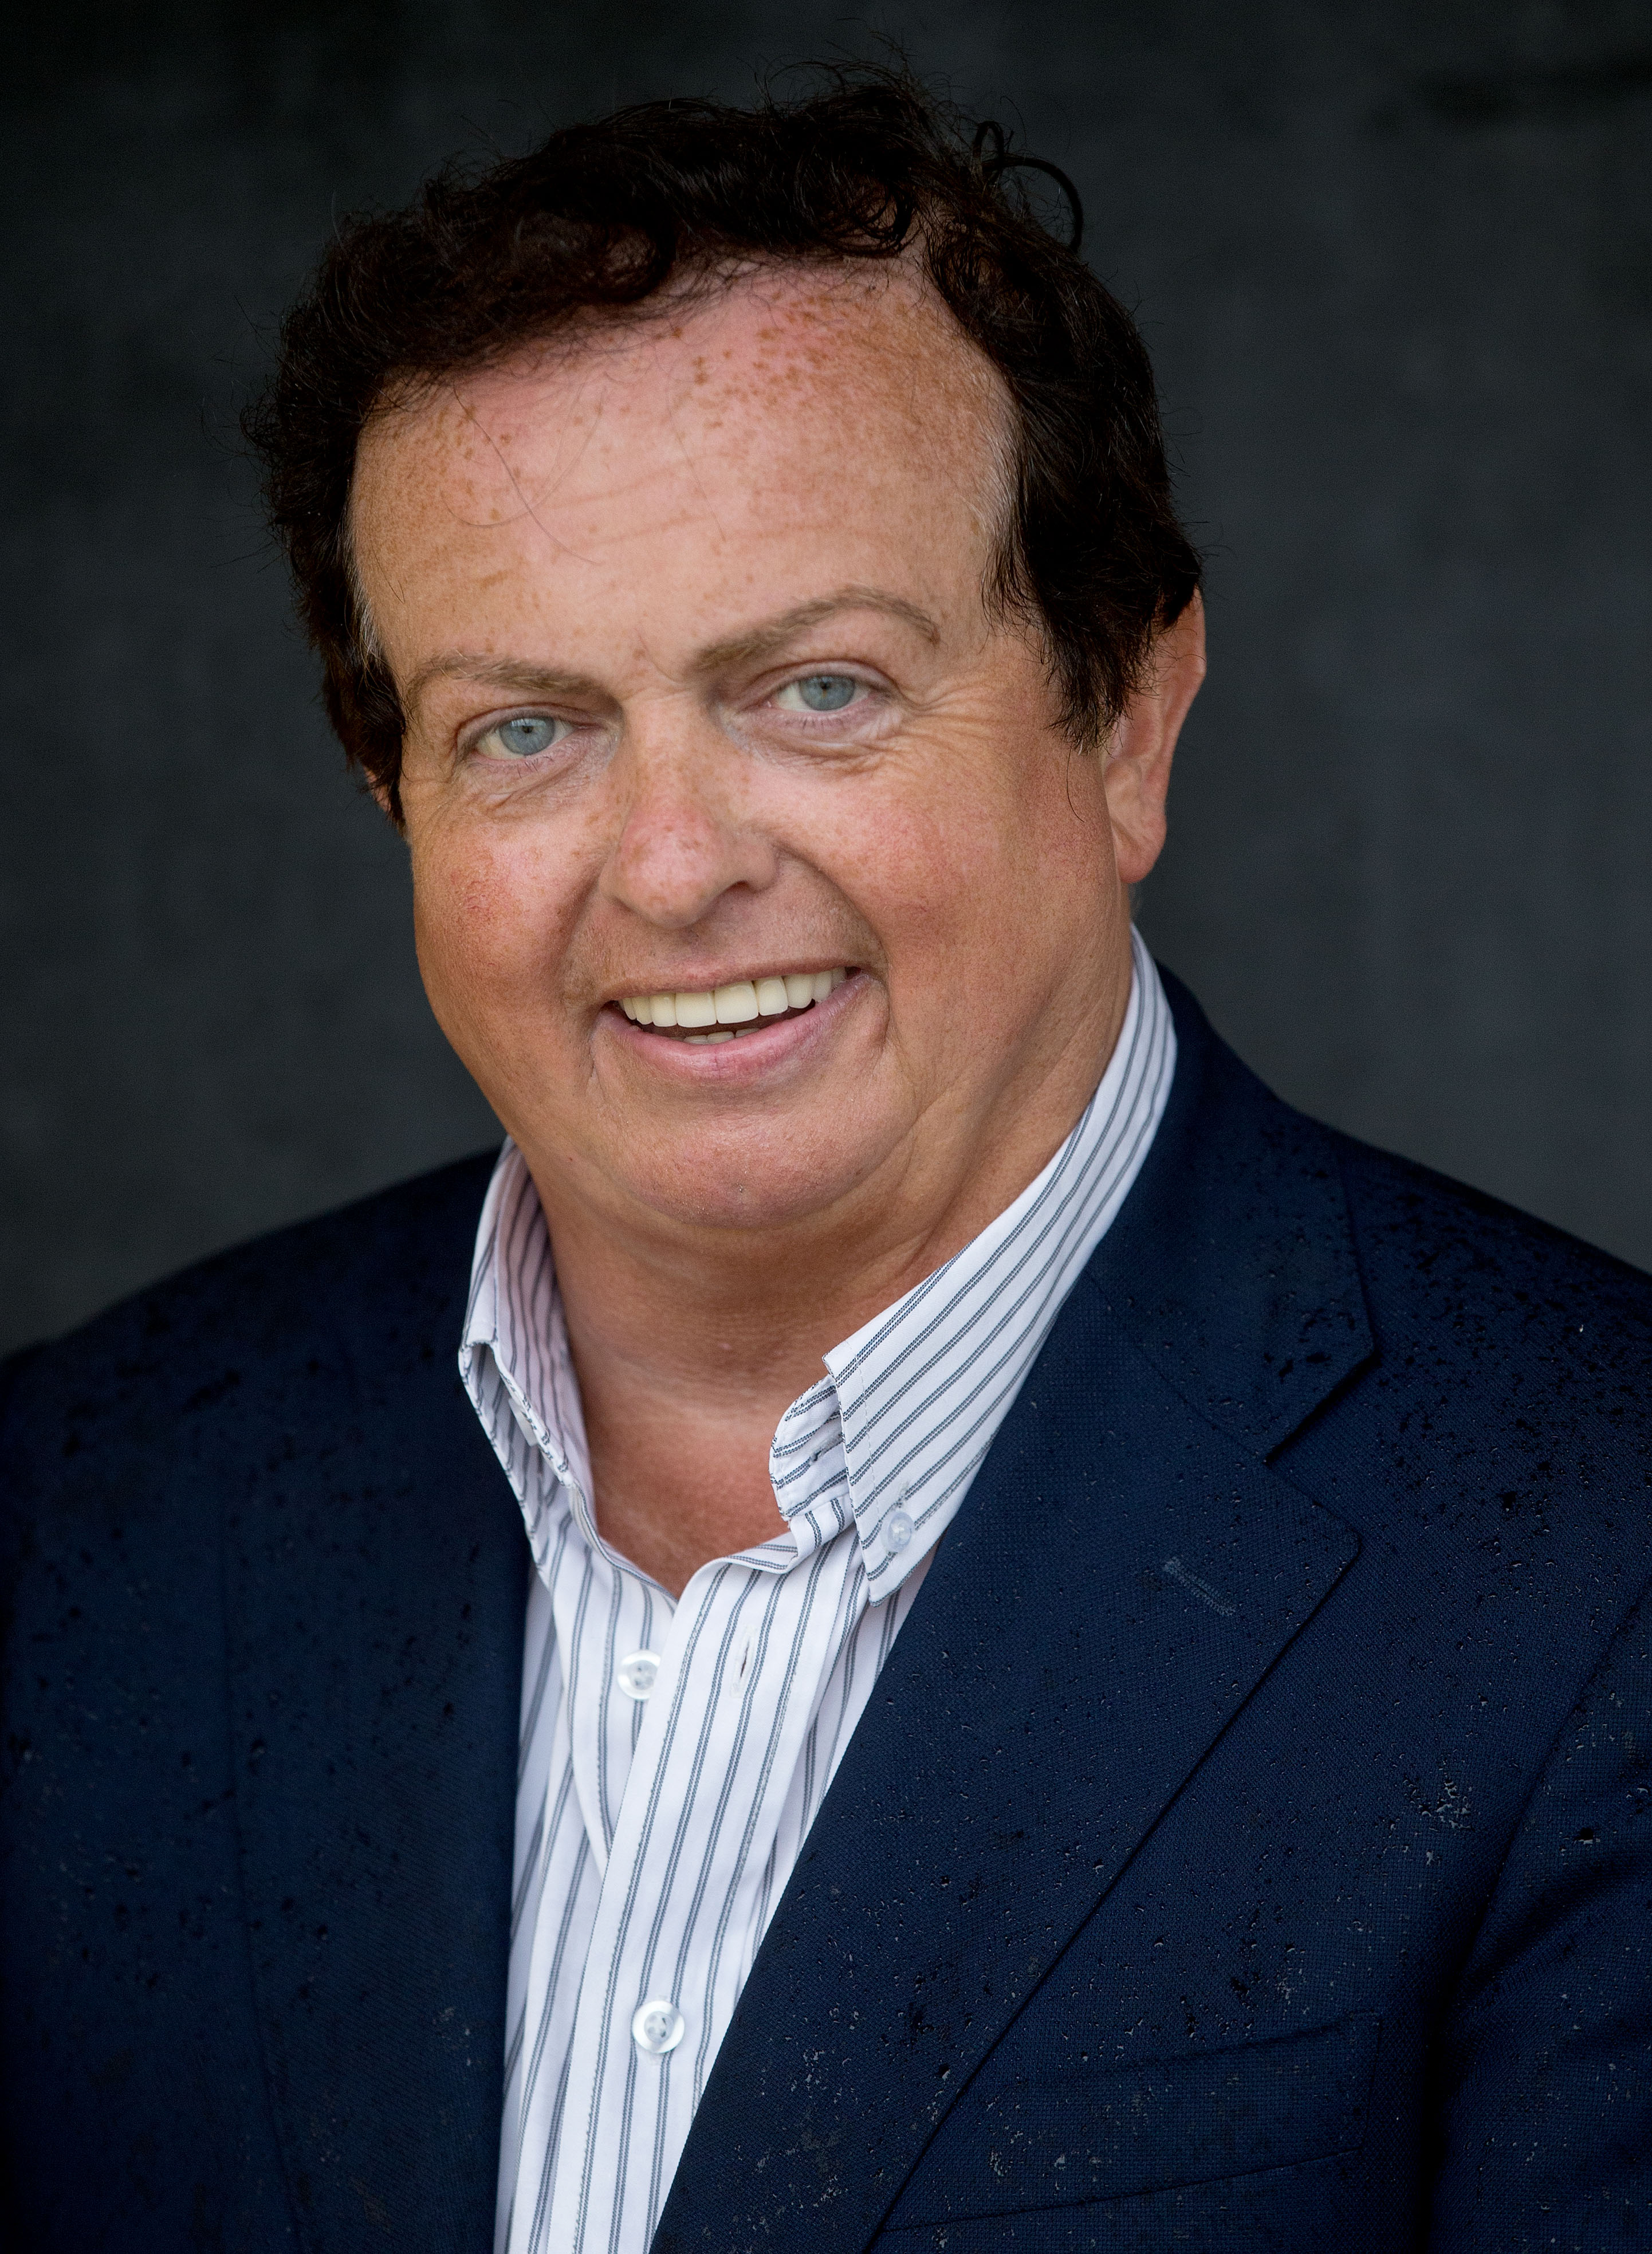 REPRO FREE***PRESS RELEASE NO REPRODUCTION FEE*** Launch Of RTÉ’s GAA Championship 2015 coverage, Austin Stacks GAA Club, Tralee, Co. Kerry 10/5/2015 RTE’s Marty Morrissey pictured at the launch of RTÉ’s GAA Championship 2015 coverage in Austin Stacks GAA Club today Mandatory Credit ©INPHO/James Crombie